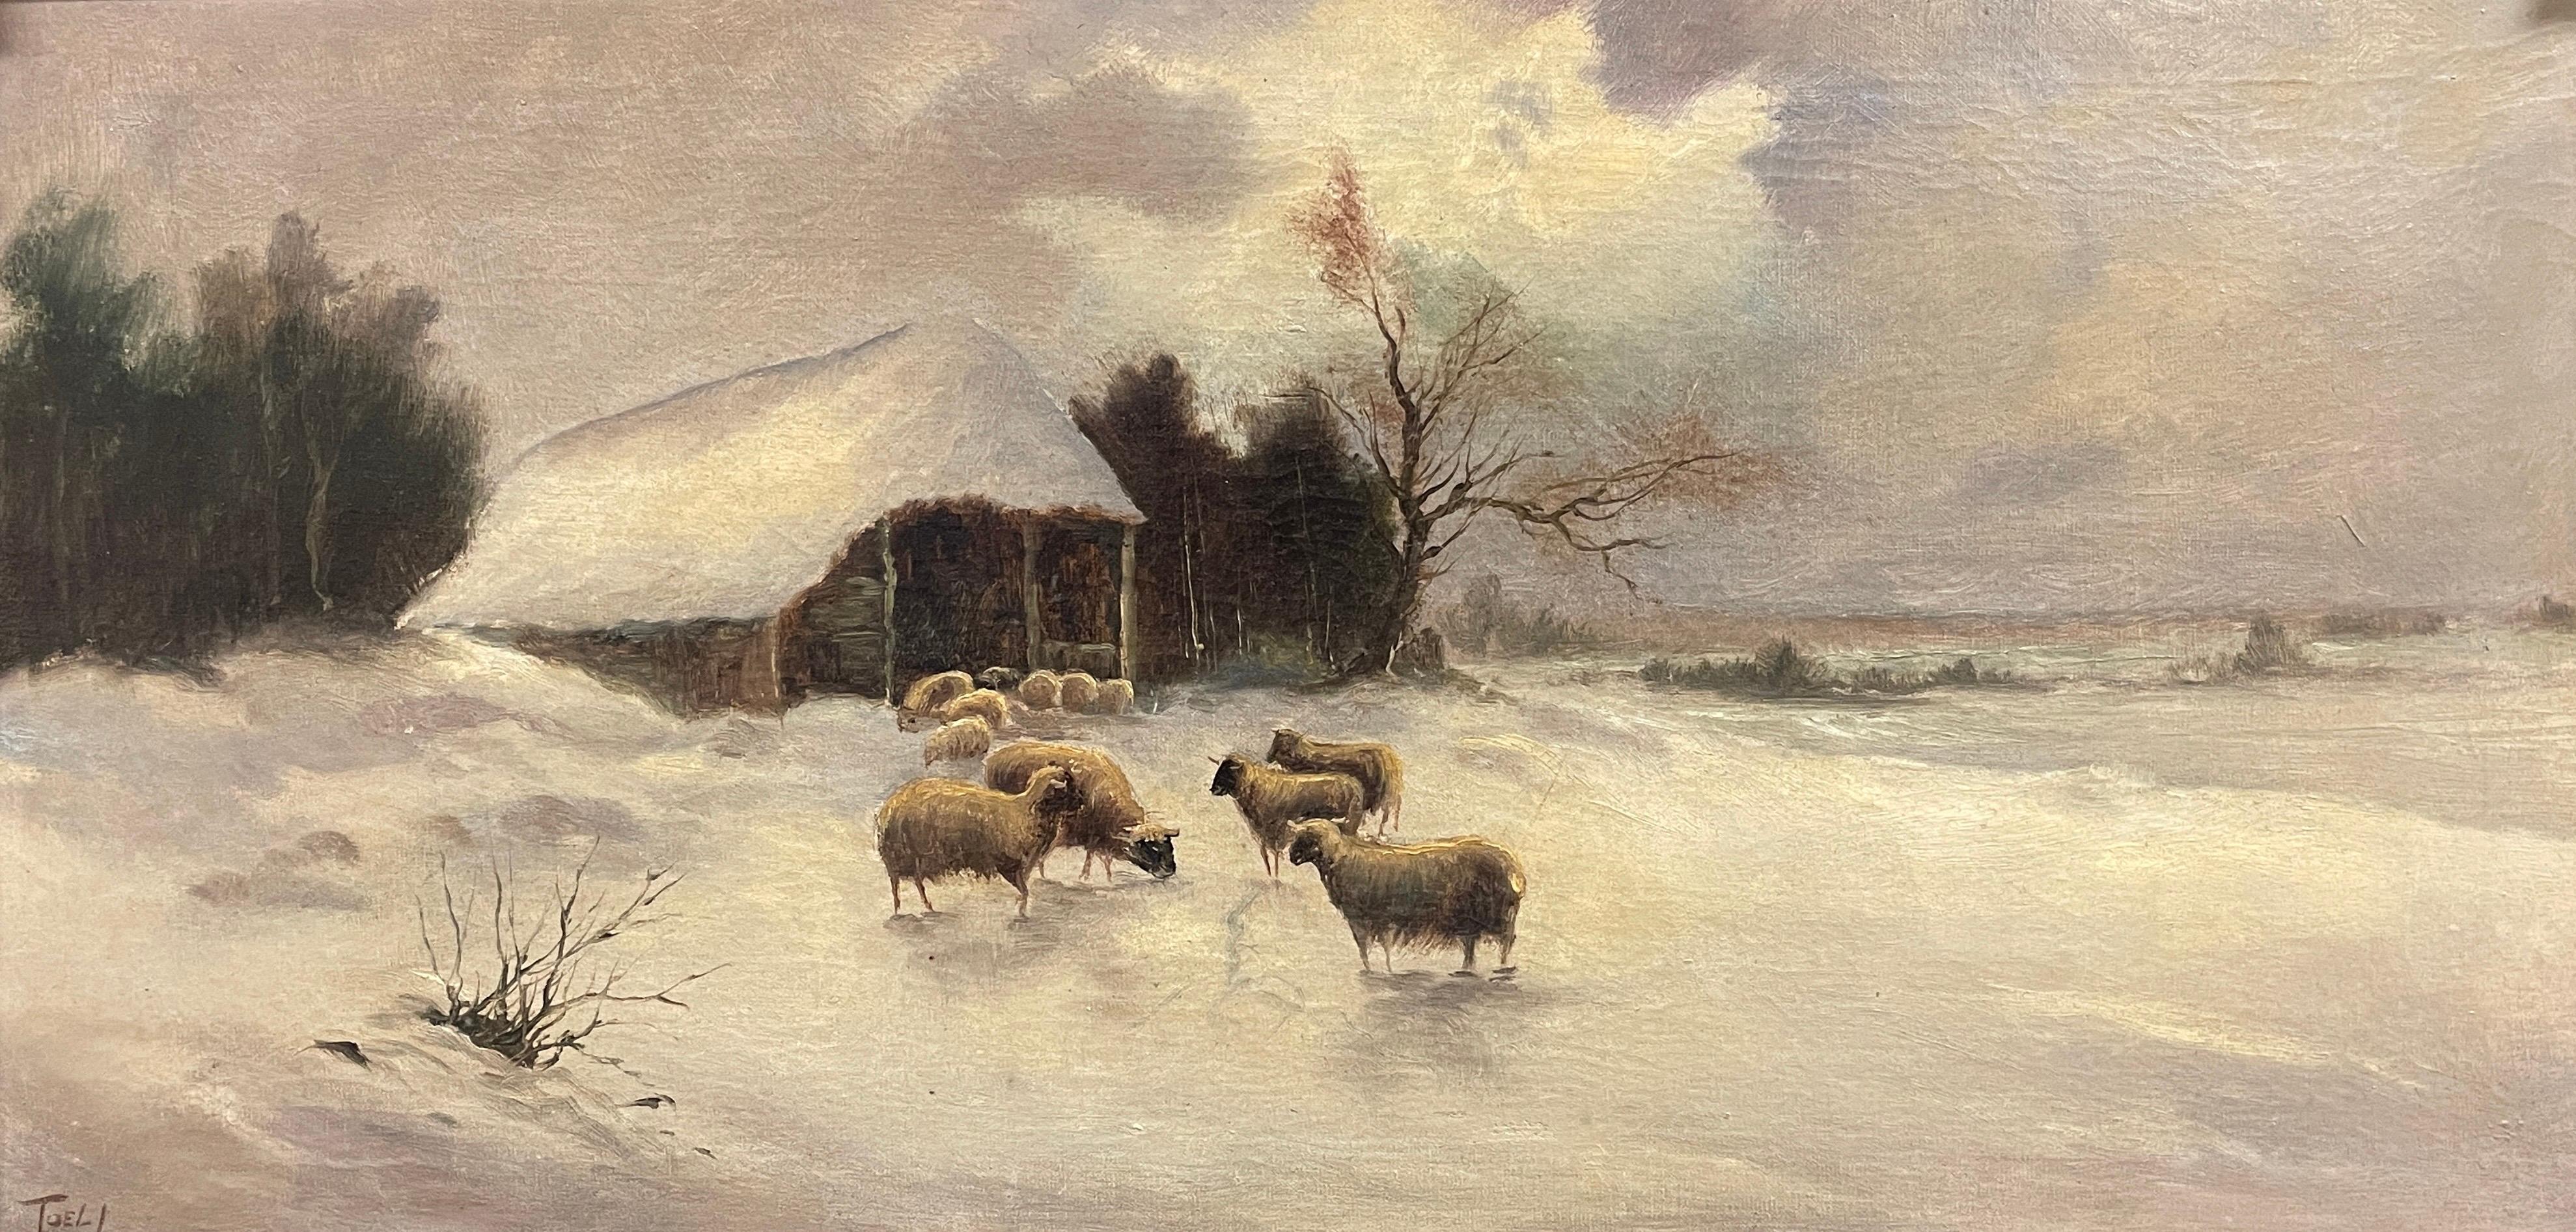 Sheep in Winter Snow Farm Landscape Antique British Oil Painting, signed